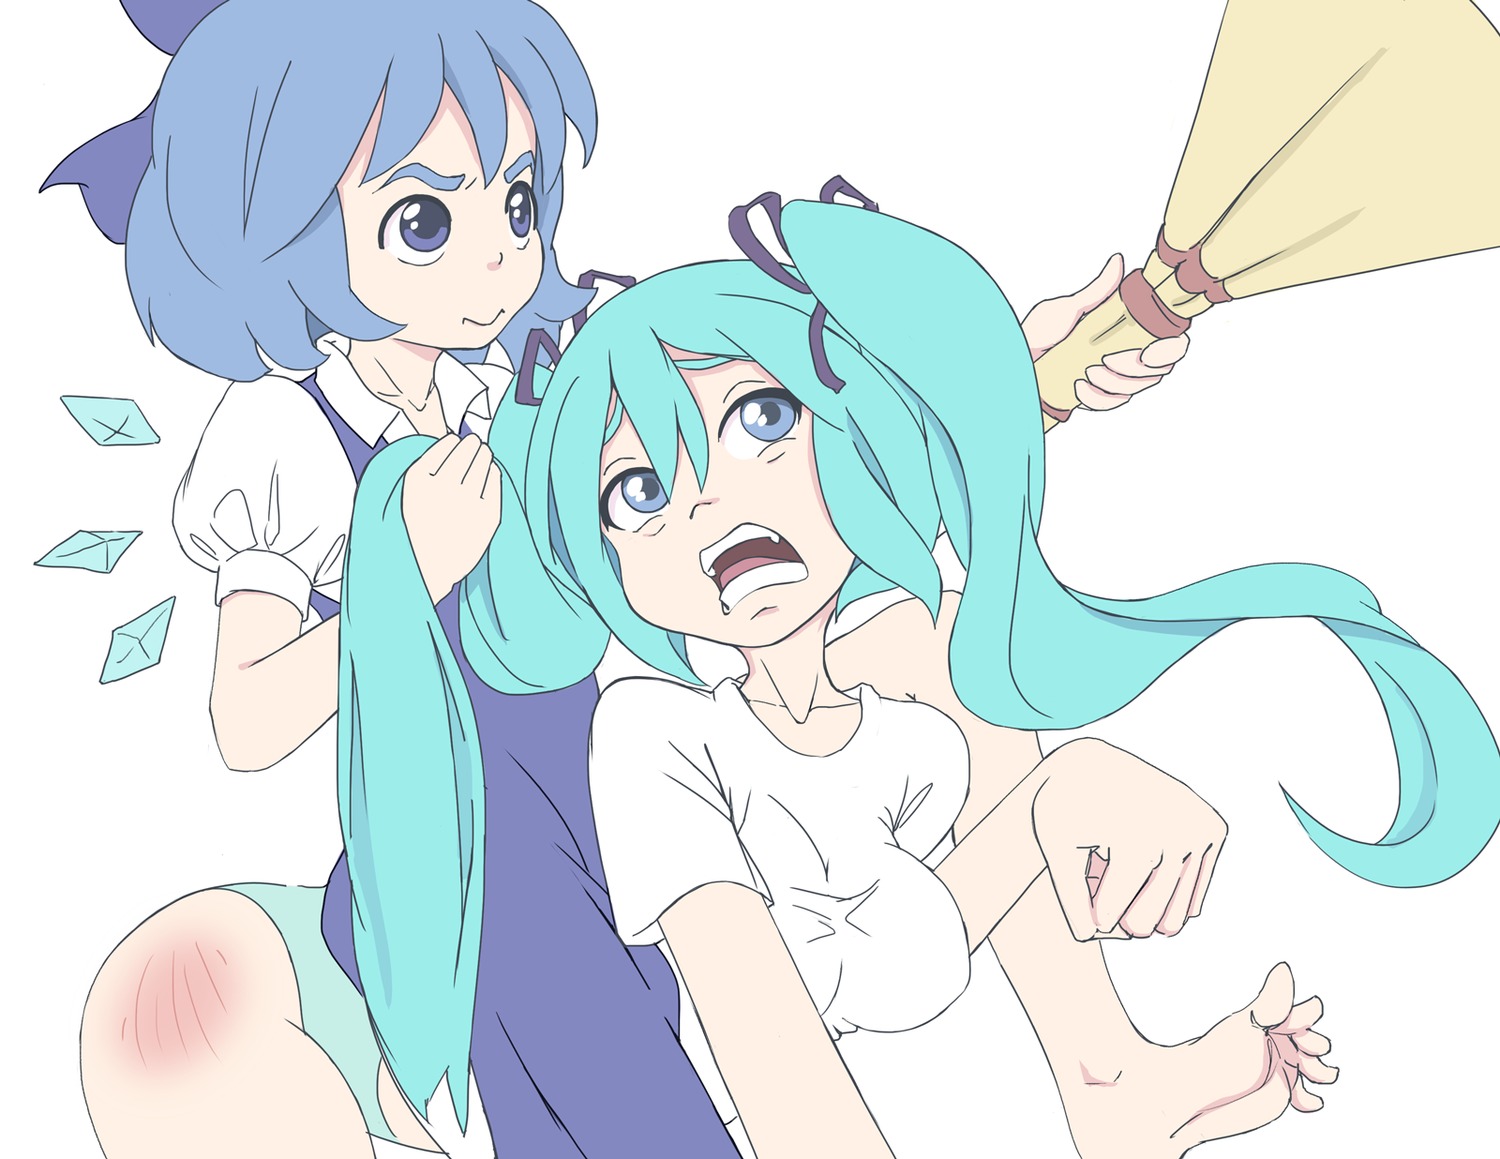 2girls aqua_hair barefoot blue_eyes blue_hair bow cirno crossover dress eyebrows hatsune_miku long_hair open_mouth riding shirt short_hair simple_background touhou t-shirt twintails vocaloid wings